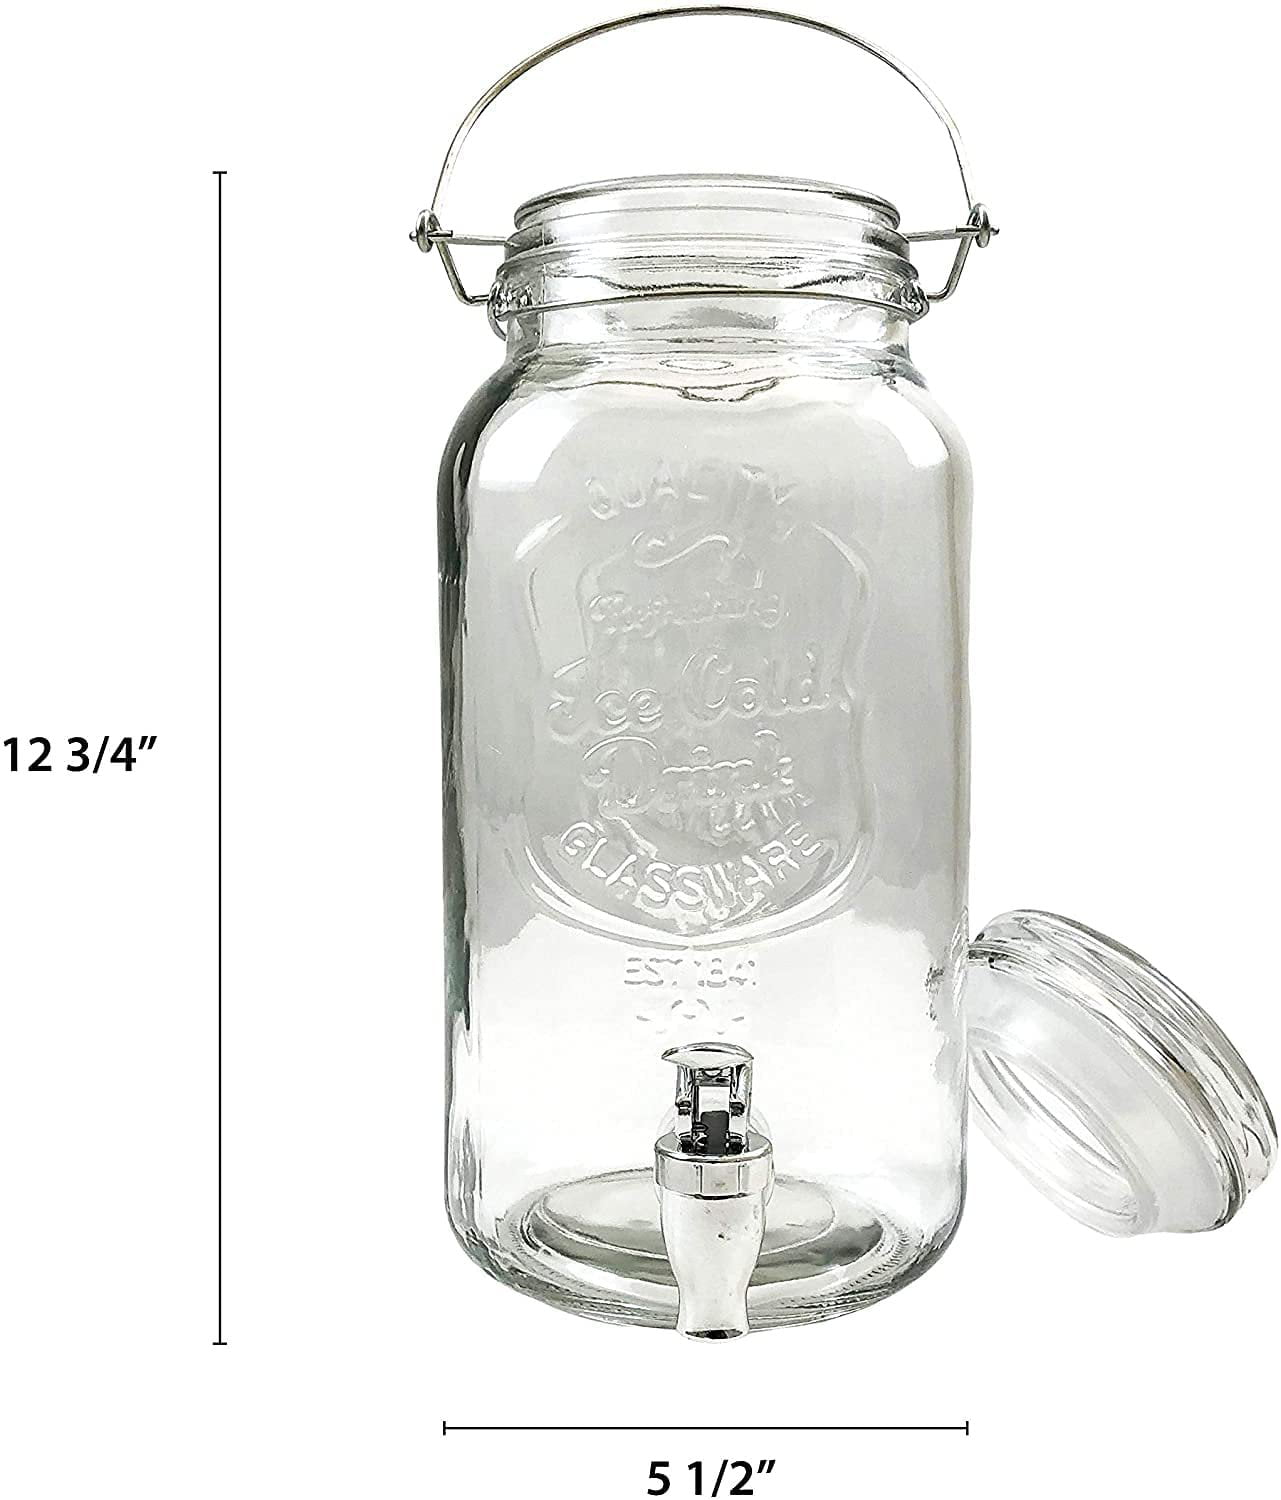 NutriChef 2-Gallon Glass Beverage Dispenser - Mason Jar Style Drink  Container Jug w/Stainless Steel Spigot & Plastic Ice Infuser, Wide Mouth  Easy